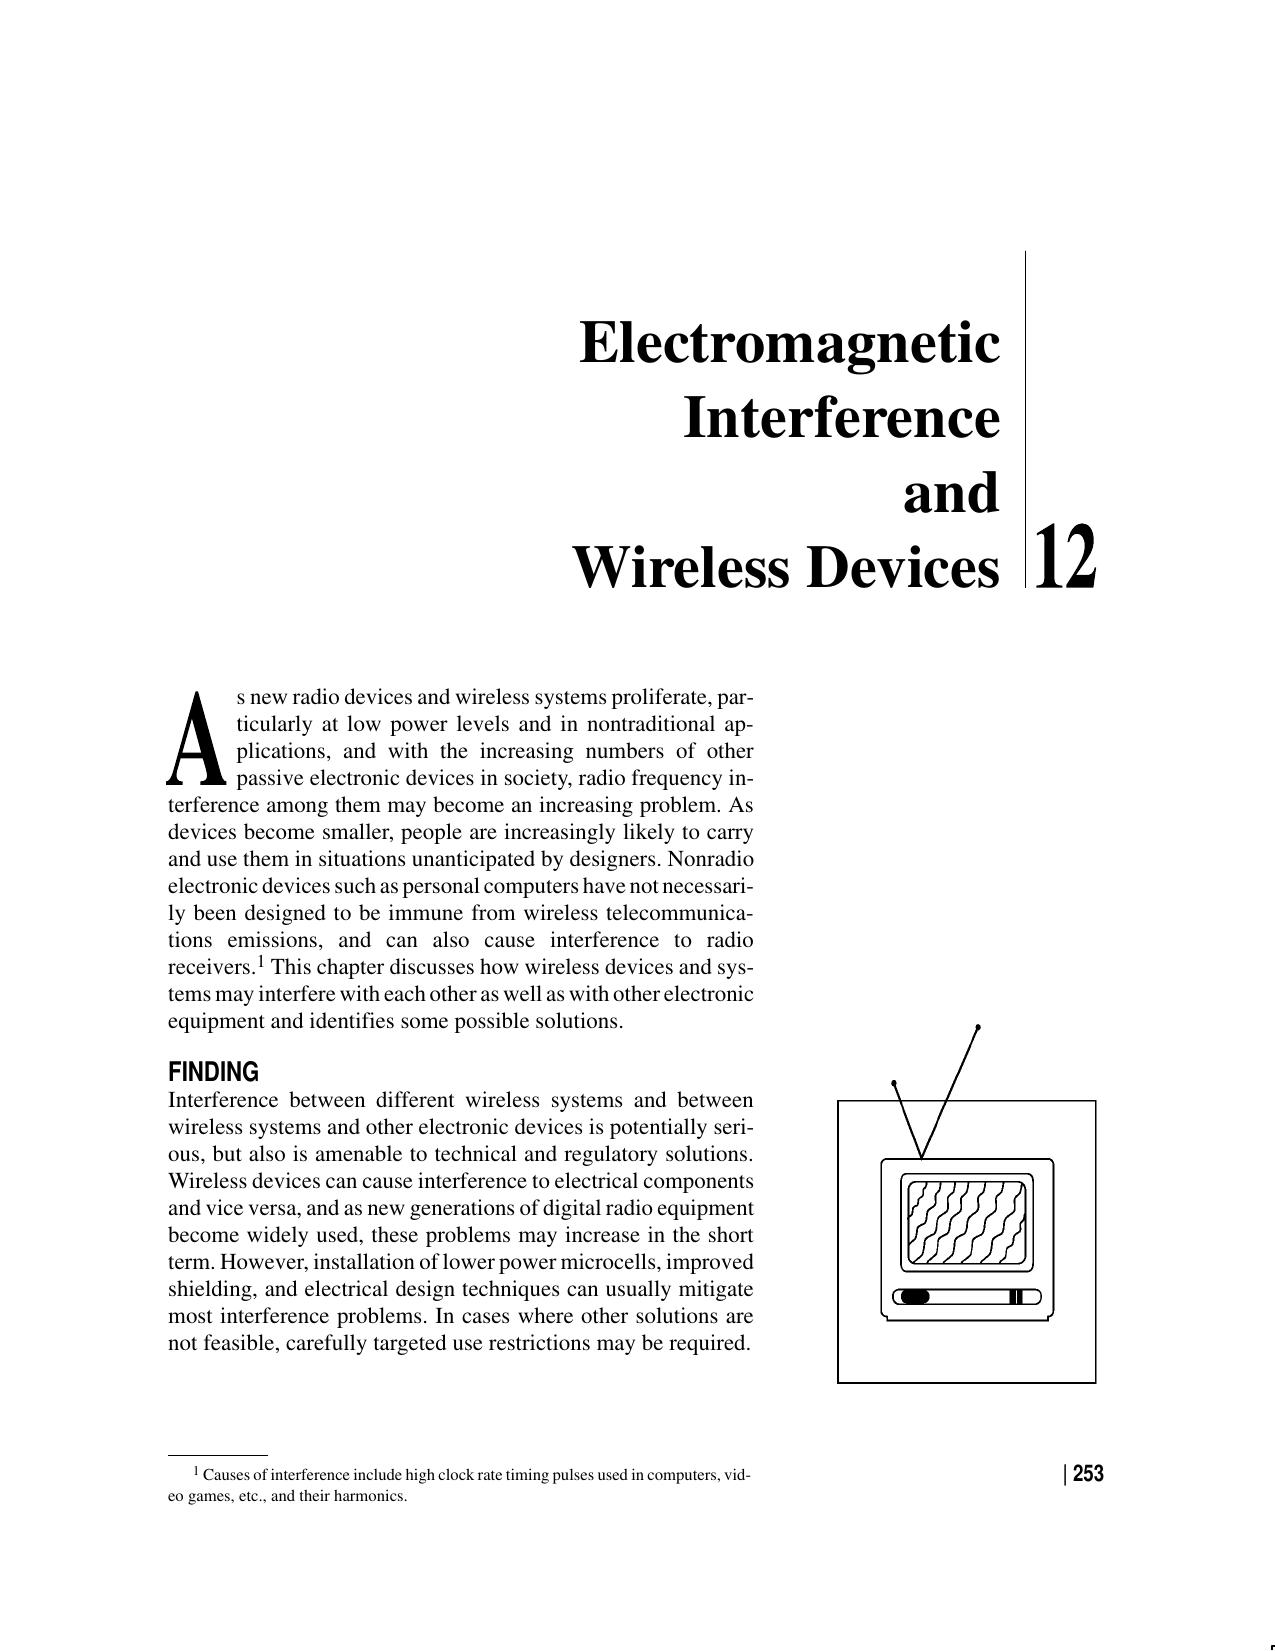 Wireless Technologies and the National Information Infrastructure (Part 15 of 21)